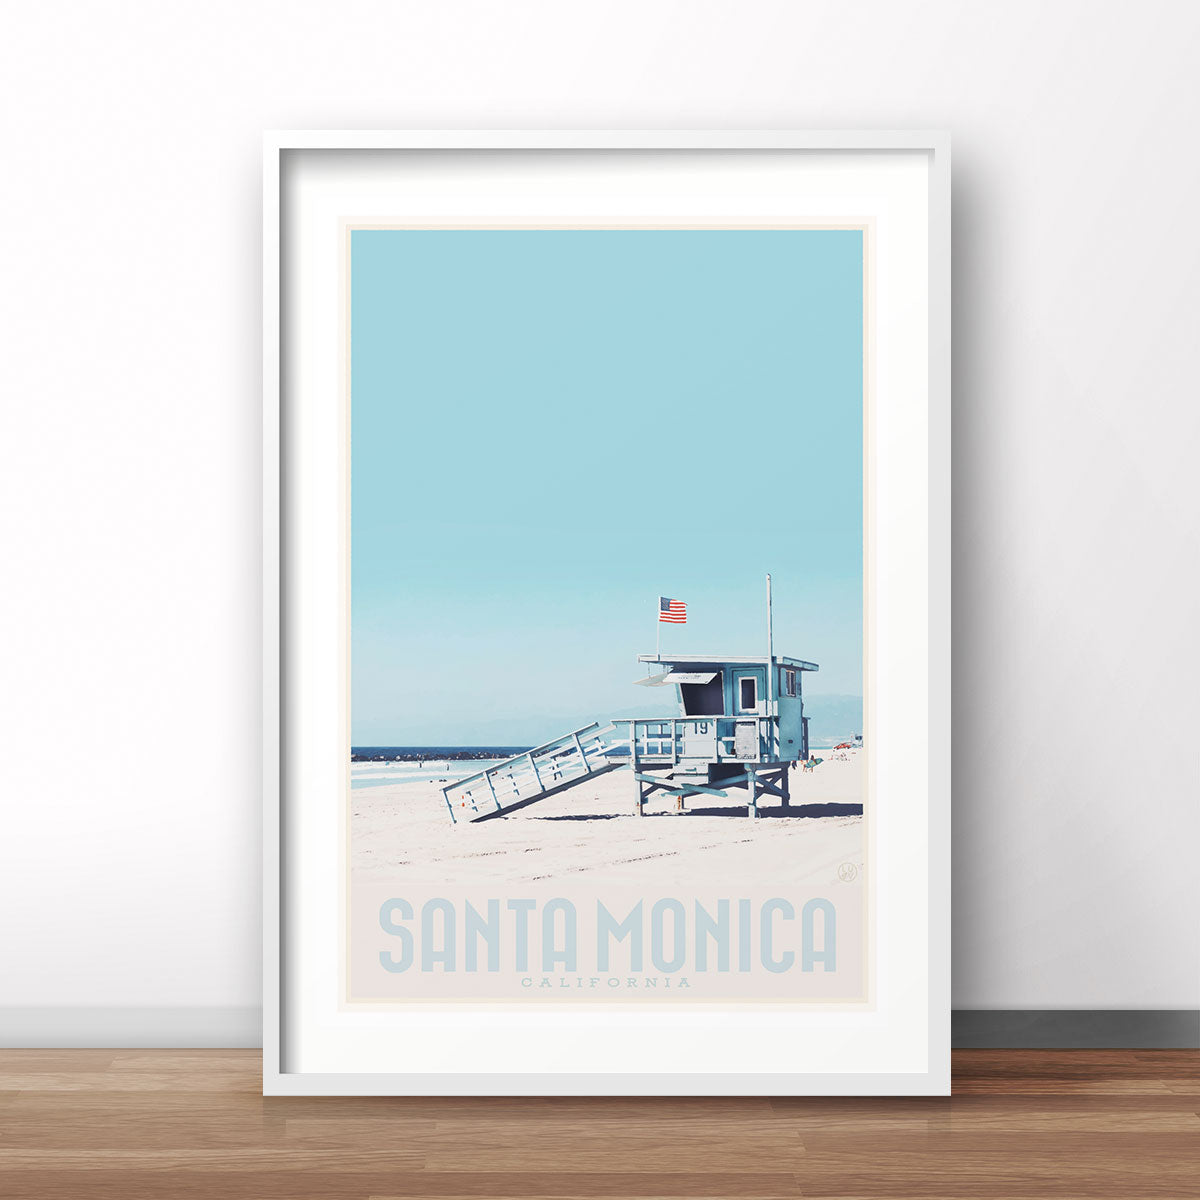 Santa Monica California vintage travel style framed print by Placesweluv